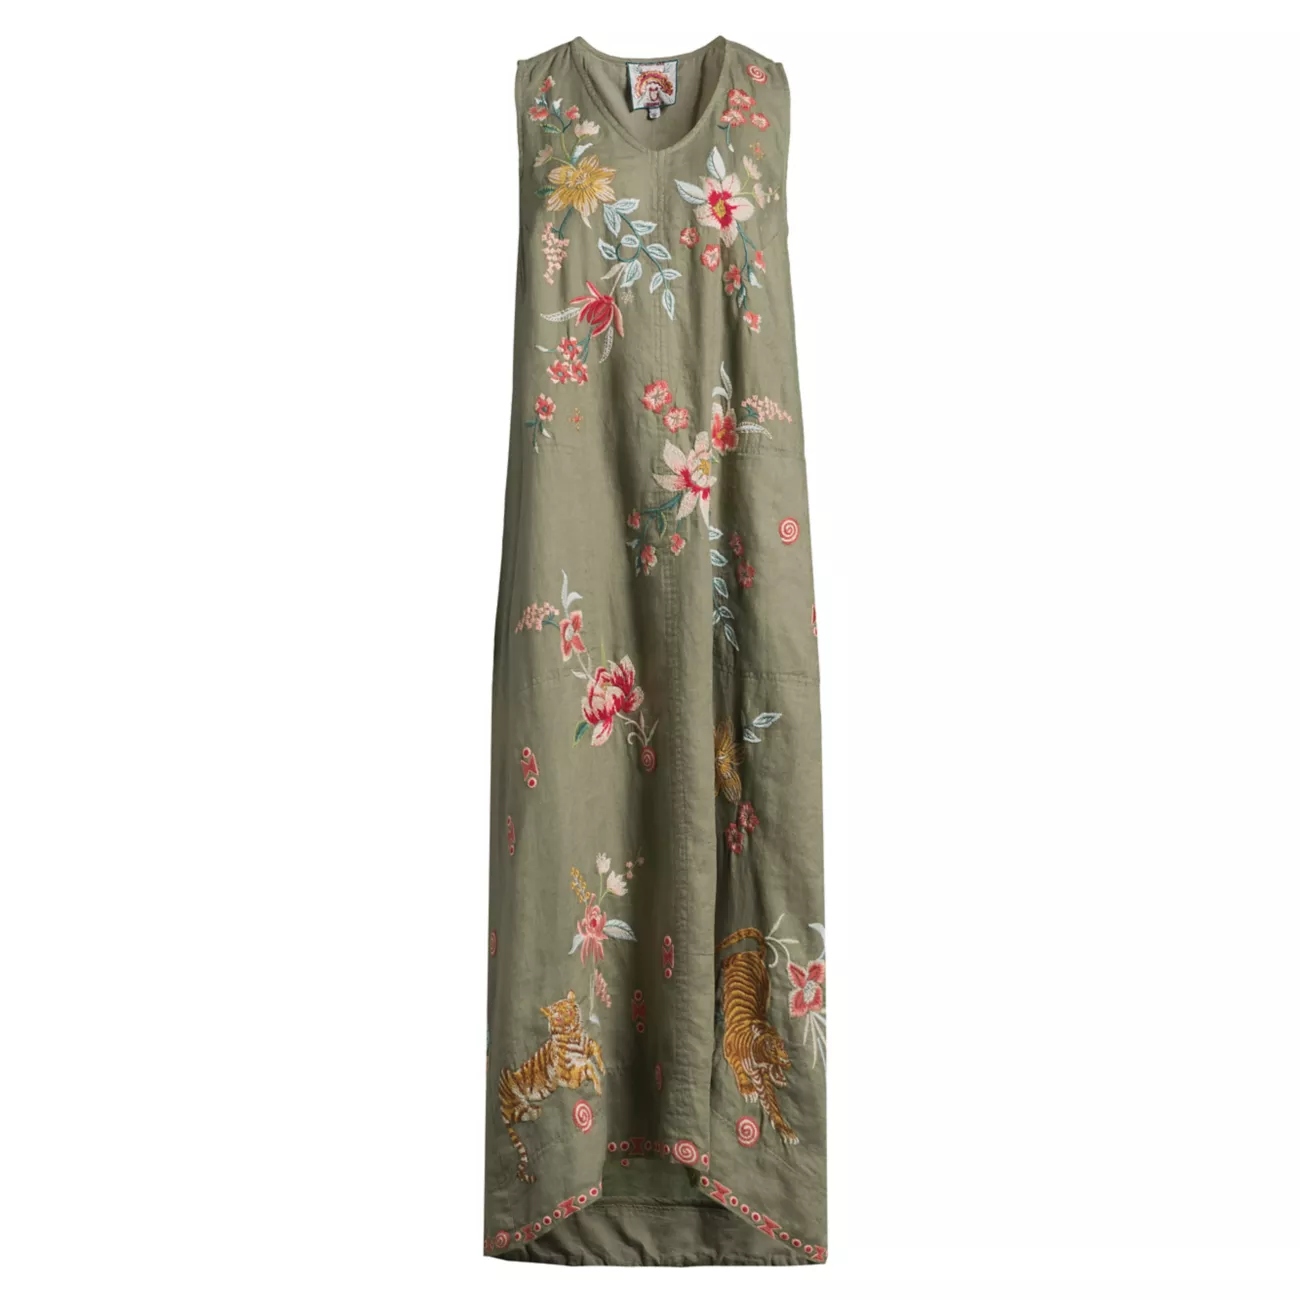 Andrean Floral Linen Tank Dress Johnny Was